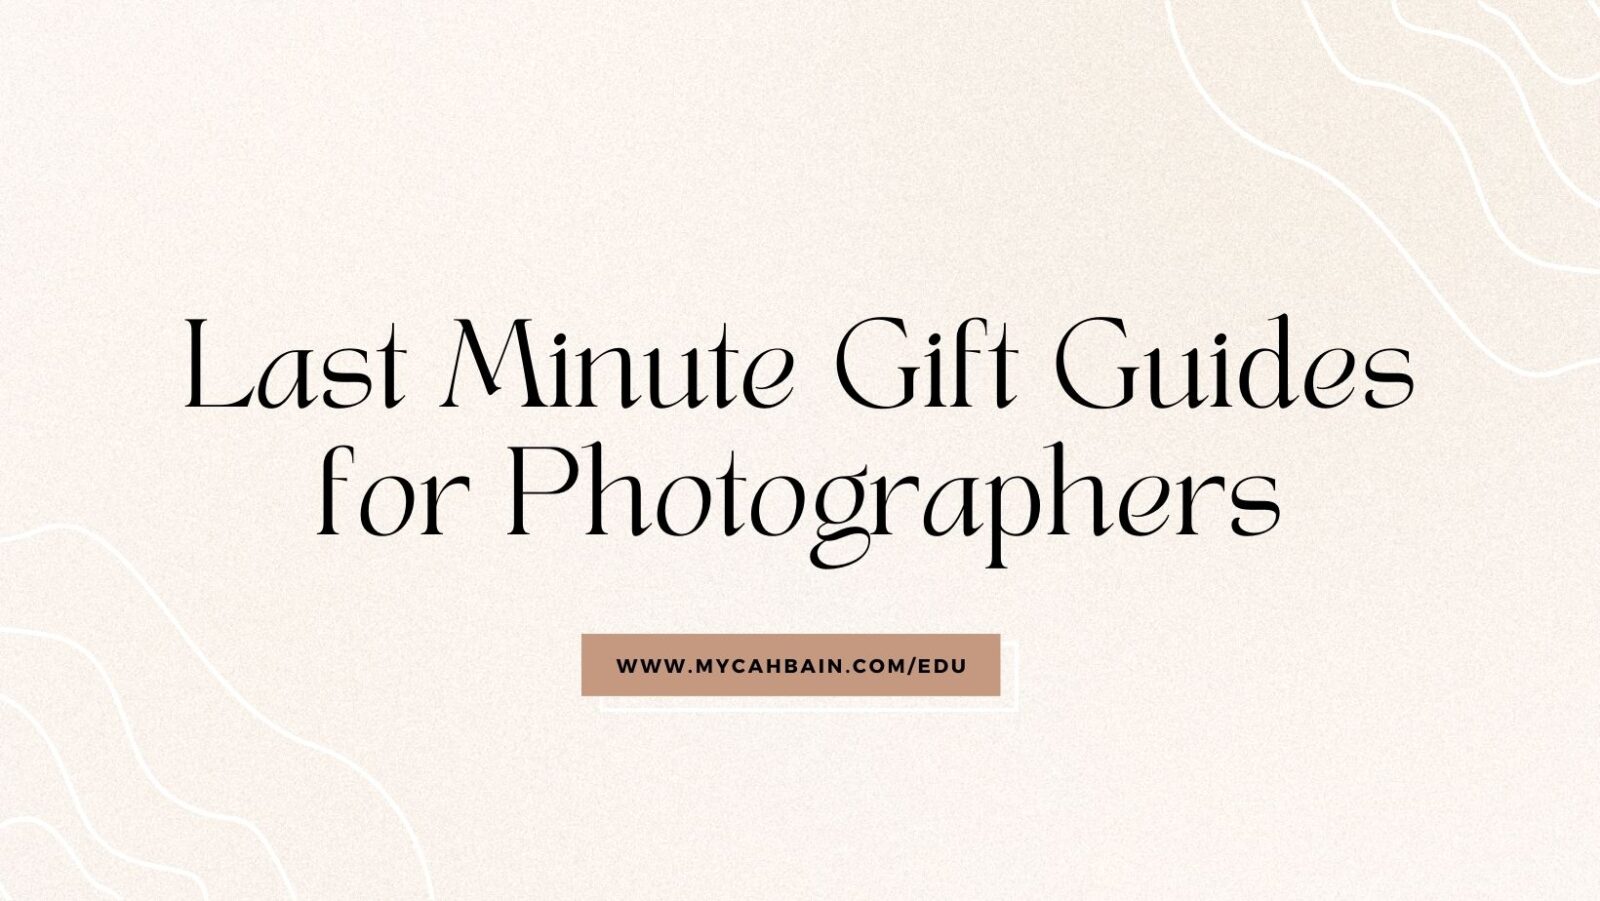 Layout about last minute gift guides for photographers